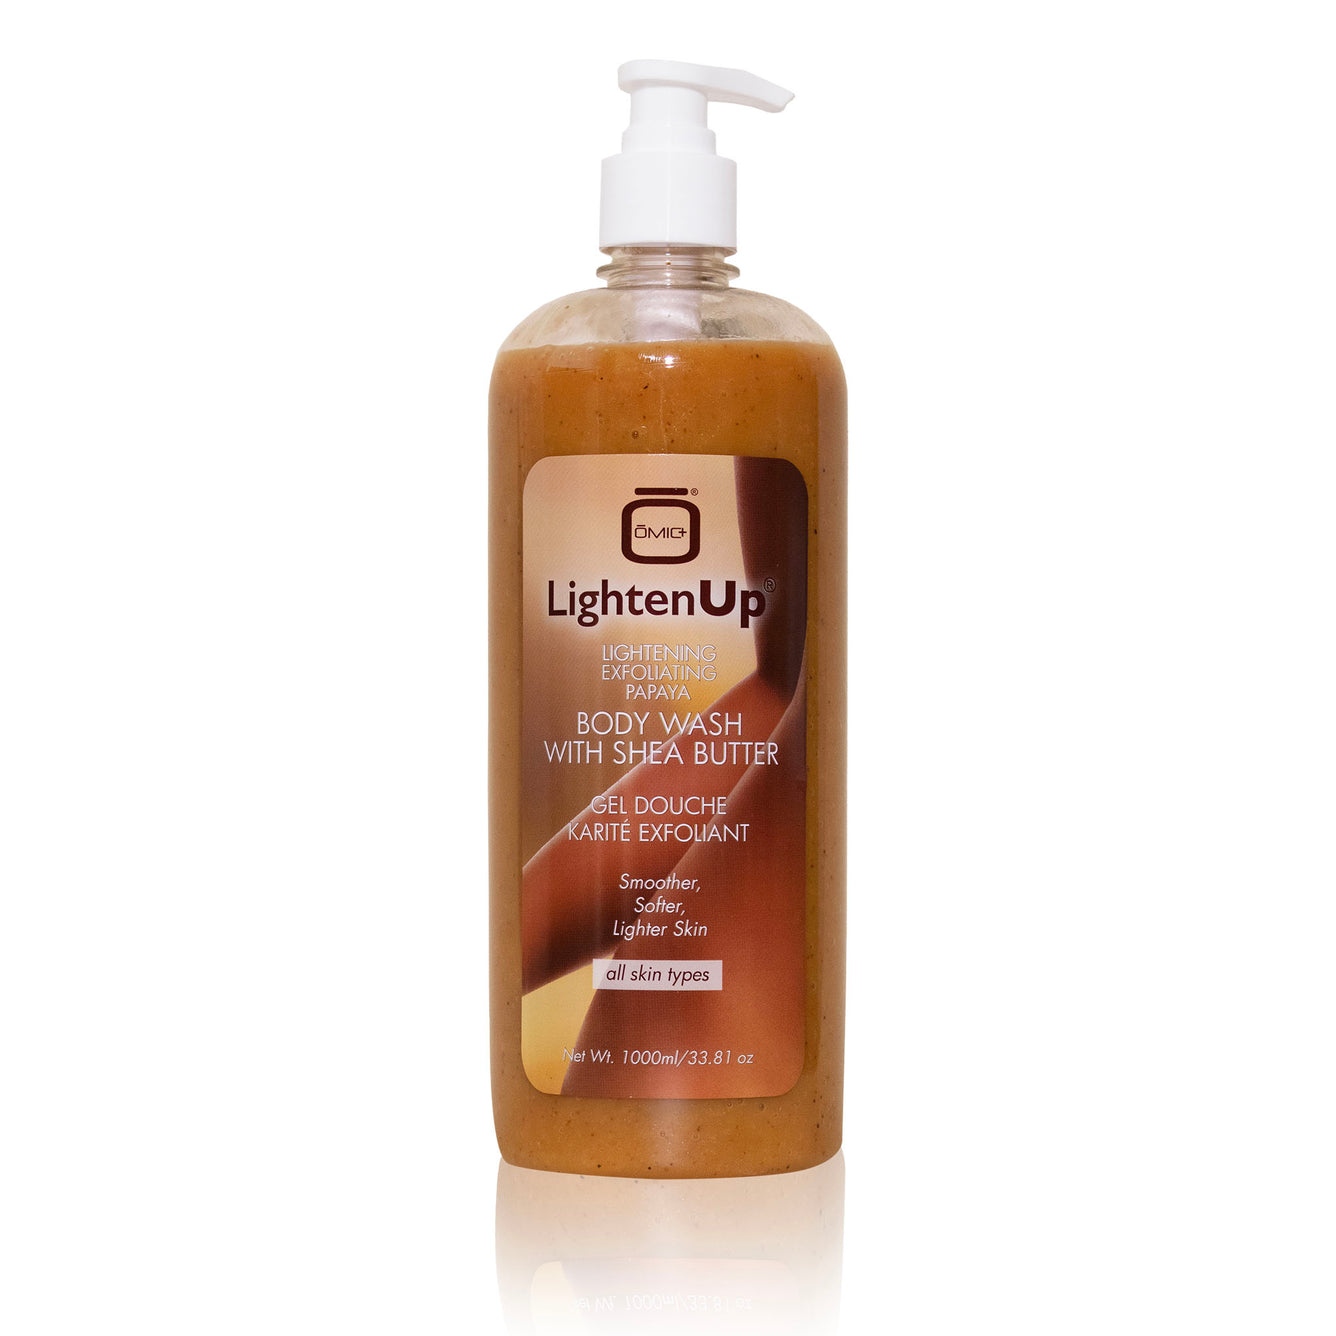 LightenUp Lightening Exfoliating Papaya  Body Wash with Shea Butter 1000ml Mitchell Brands - Mitchell Brands - Skin Lightening, Skin Brightening, Fade Dark Spots, Shea Butter, Hair Growth Products